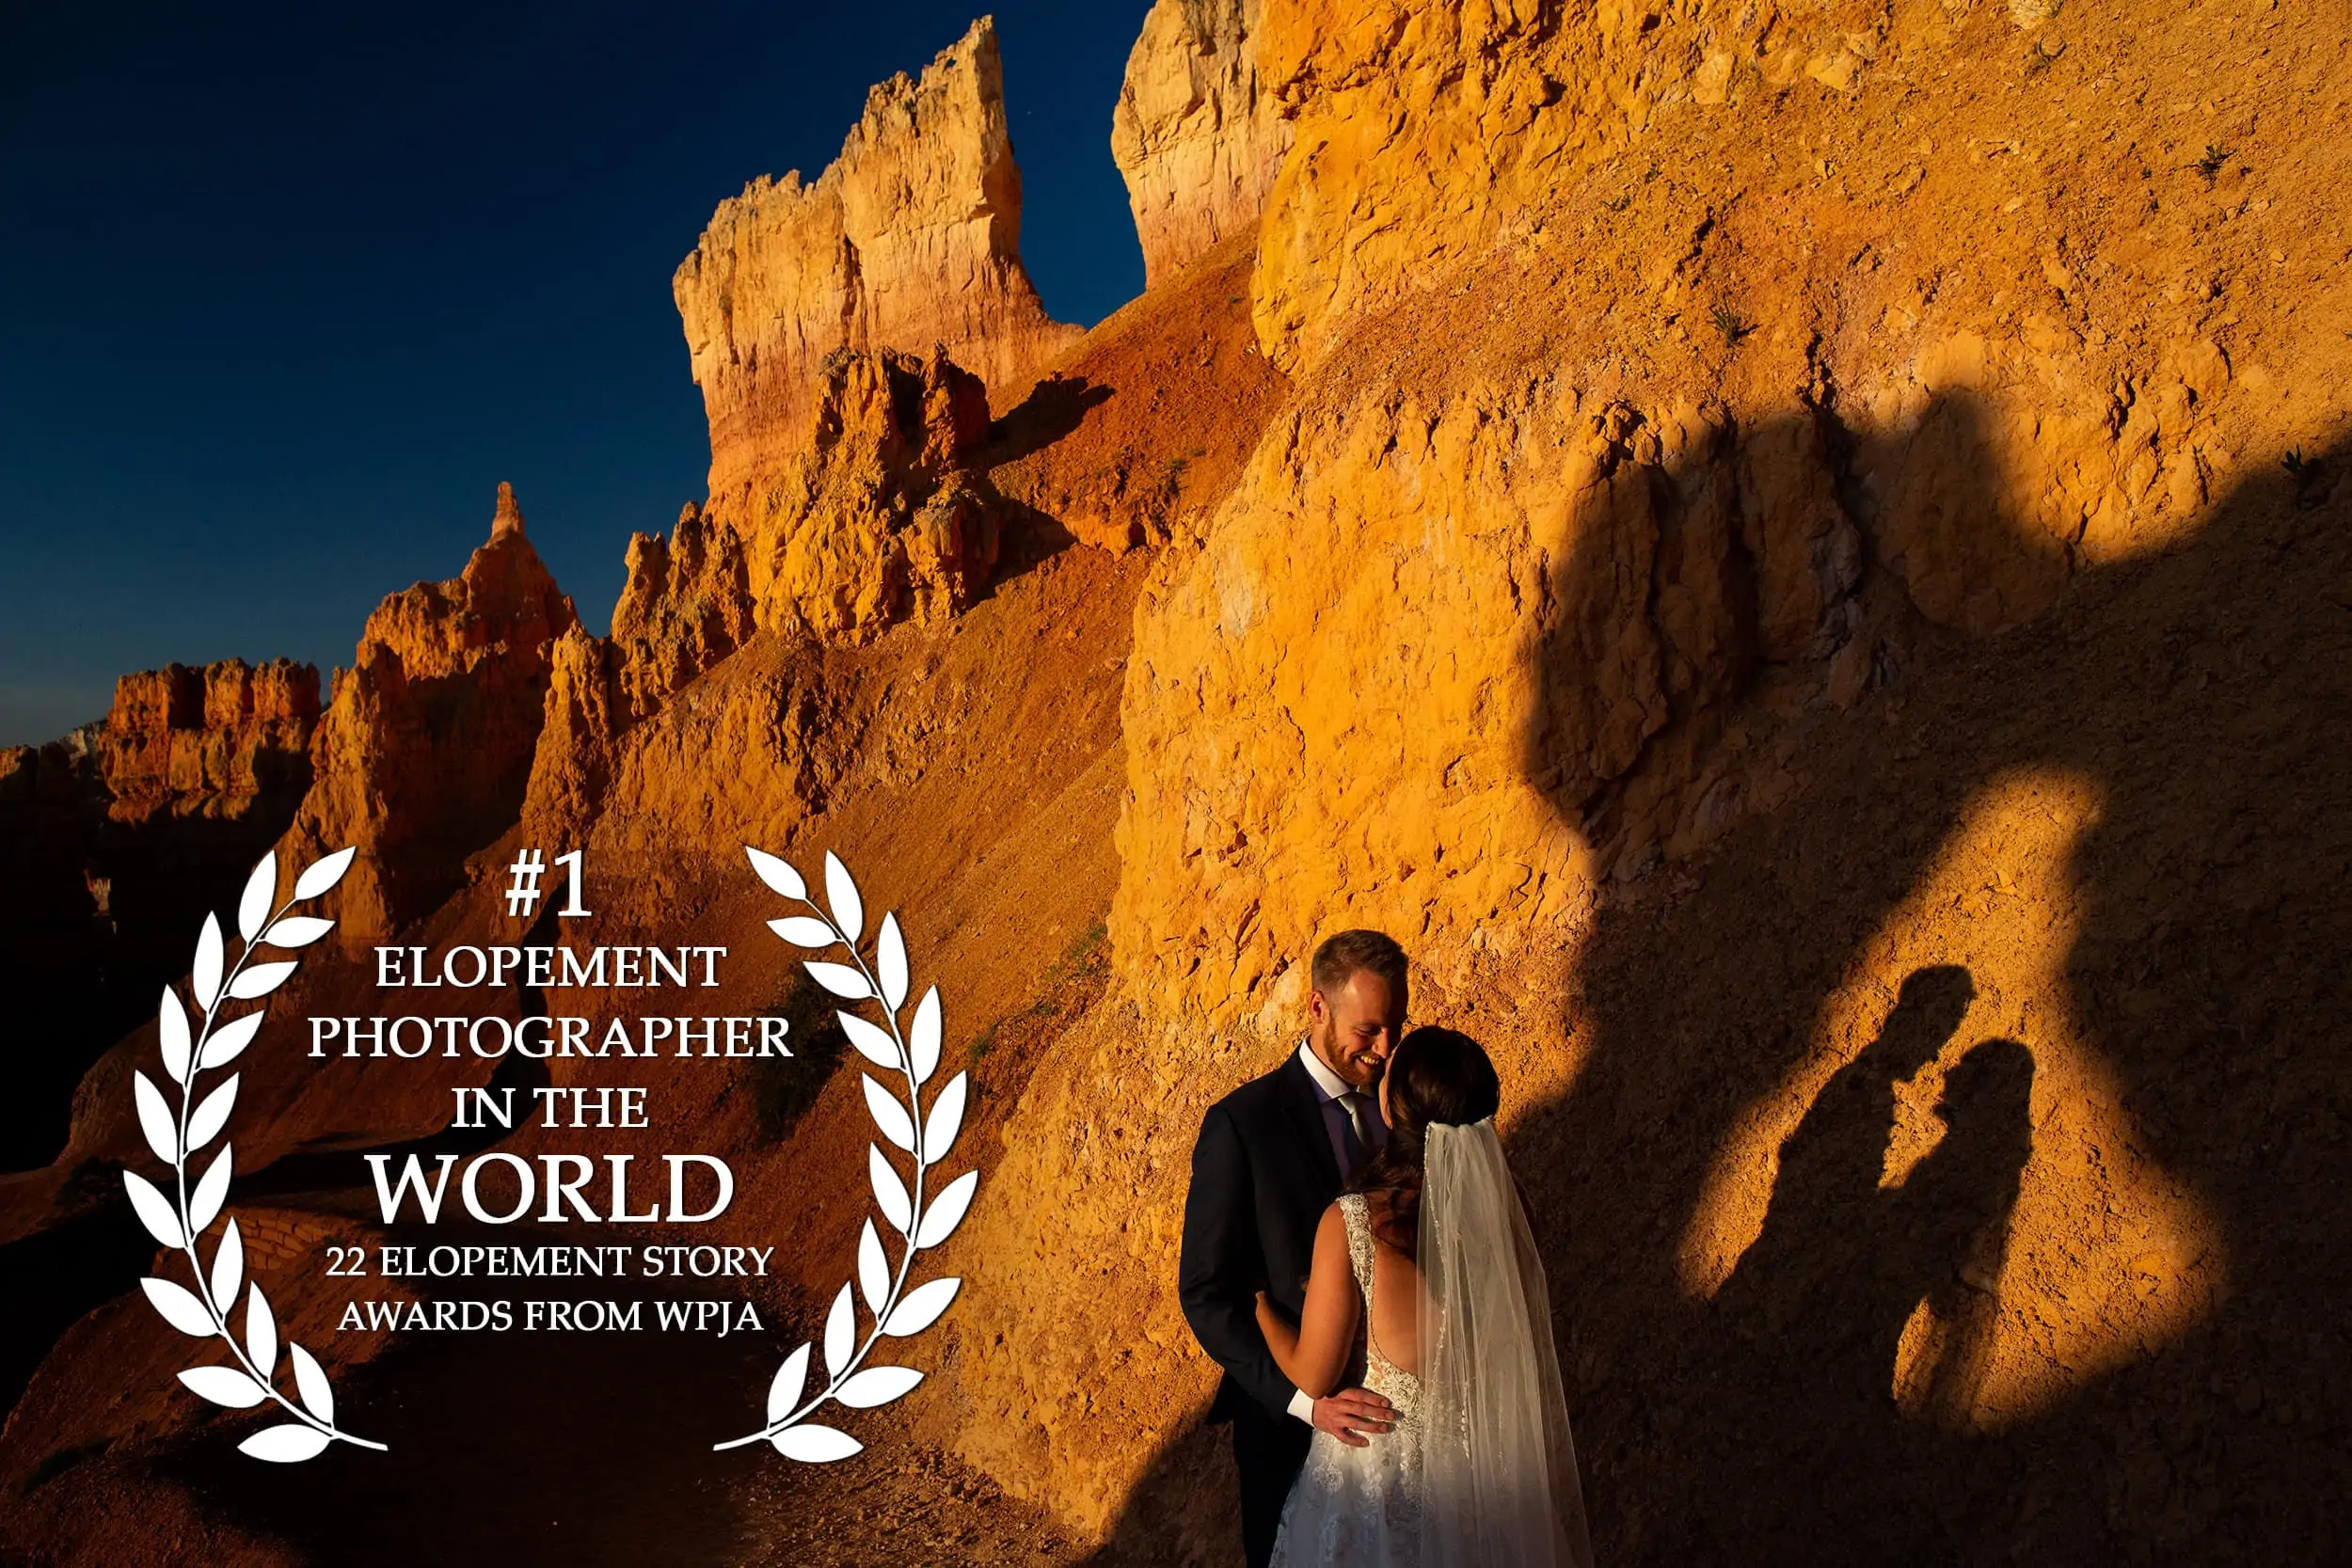 A photo of an elopement couple in a  desert national park, with their silhouettes on the rock next to them, and the text "#1 elopement photographer in the world, 22 elopement story awards from WPJA" superimposed on the left of the image.